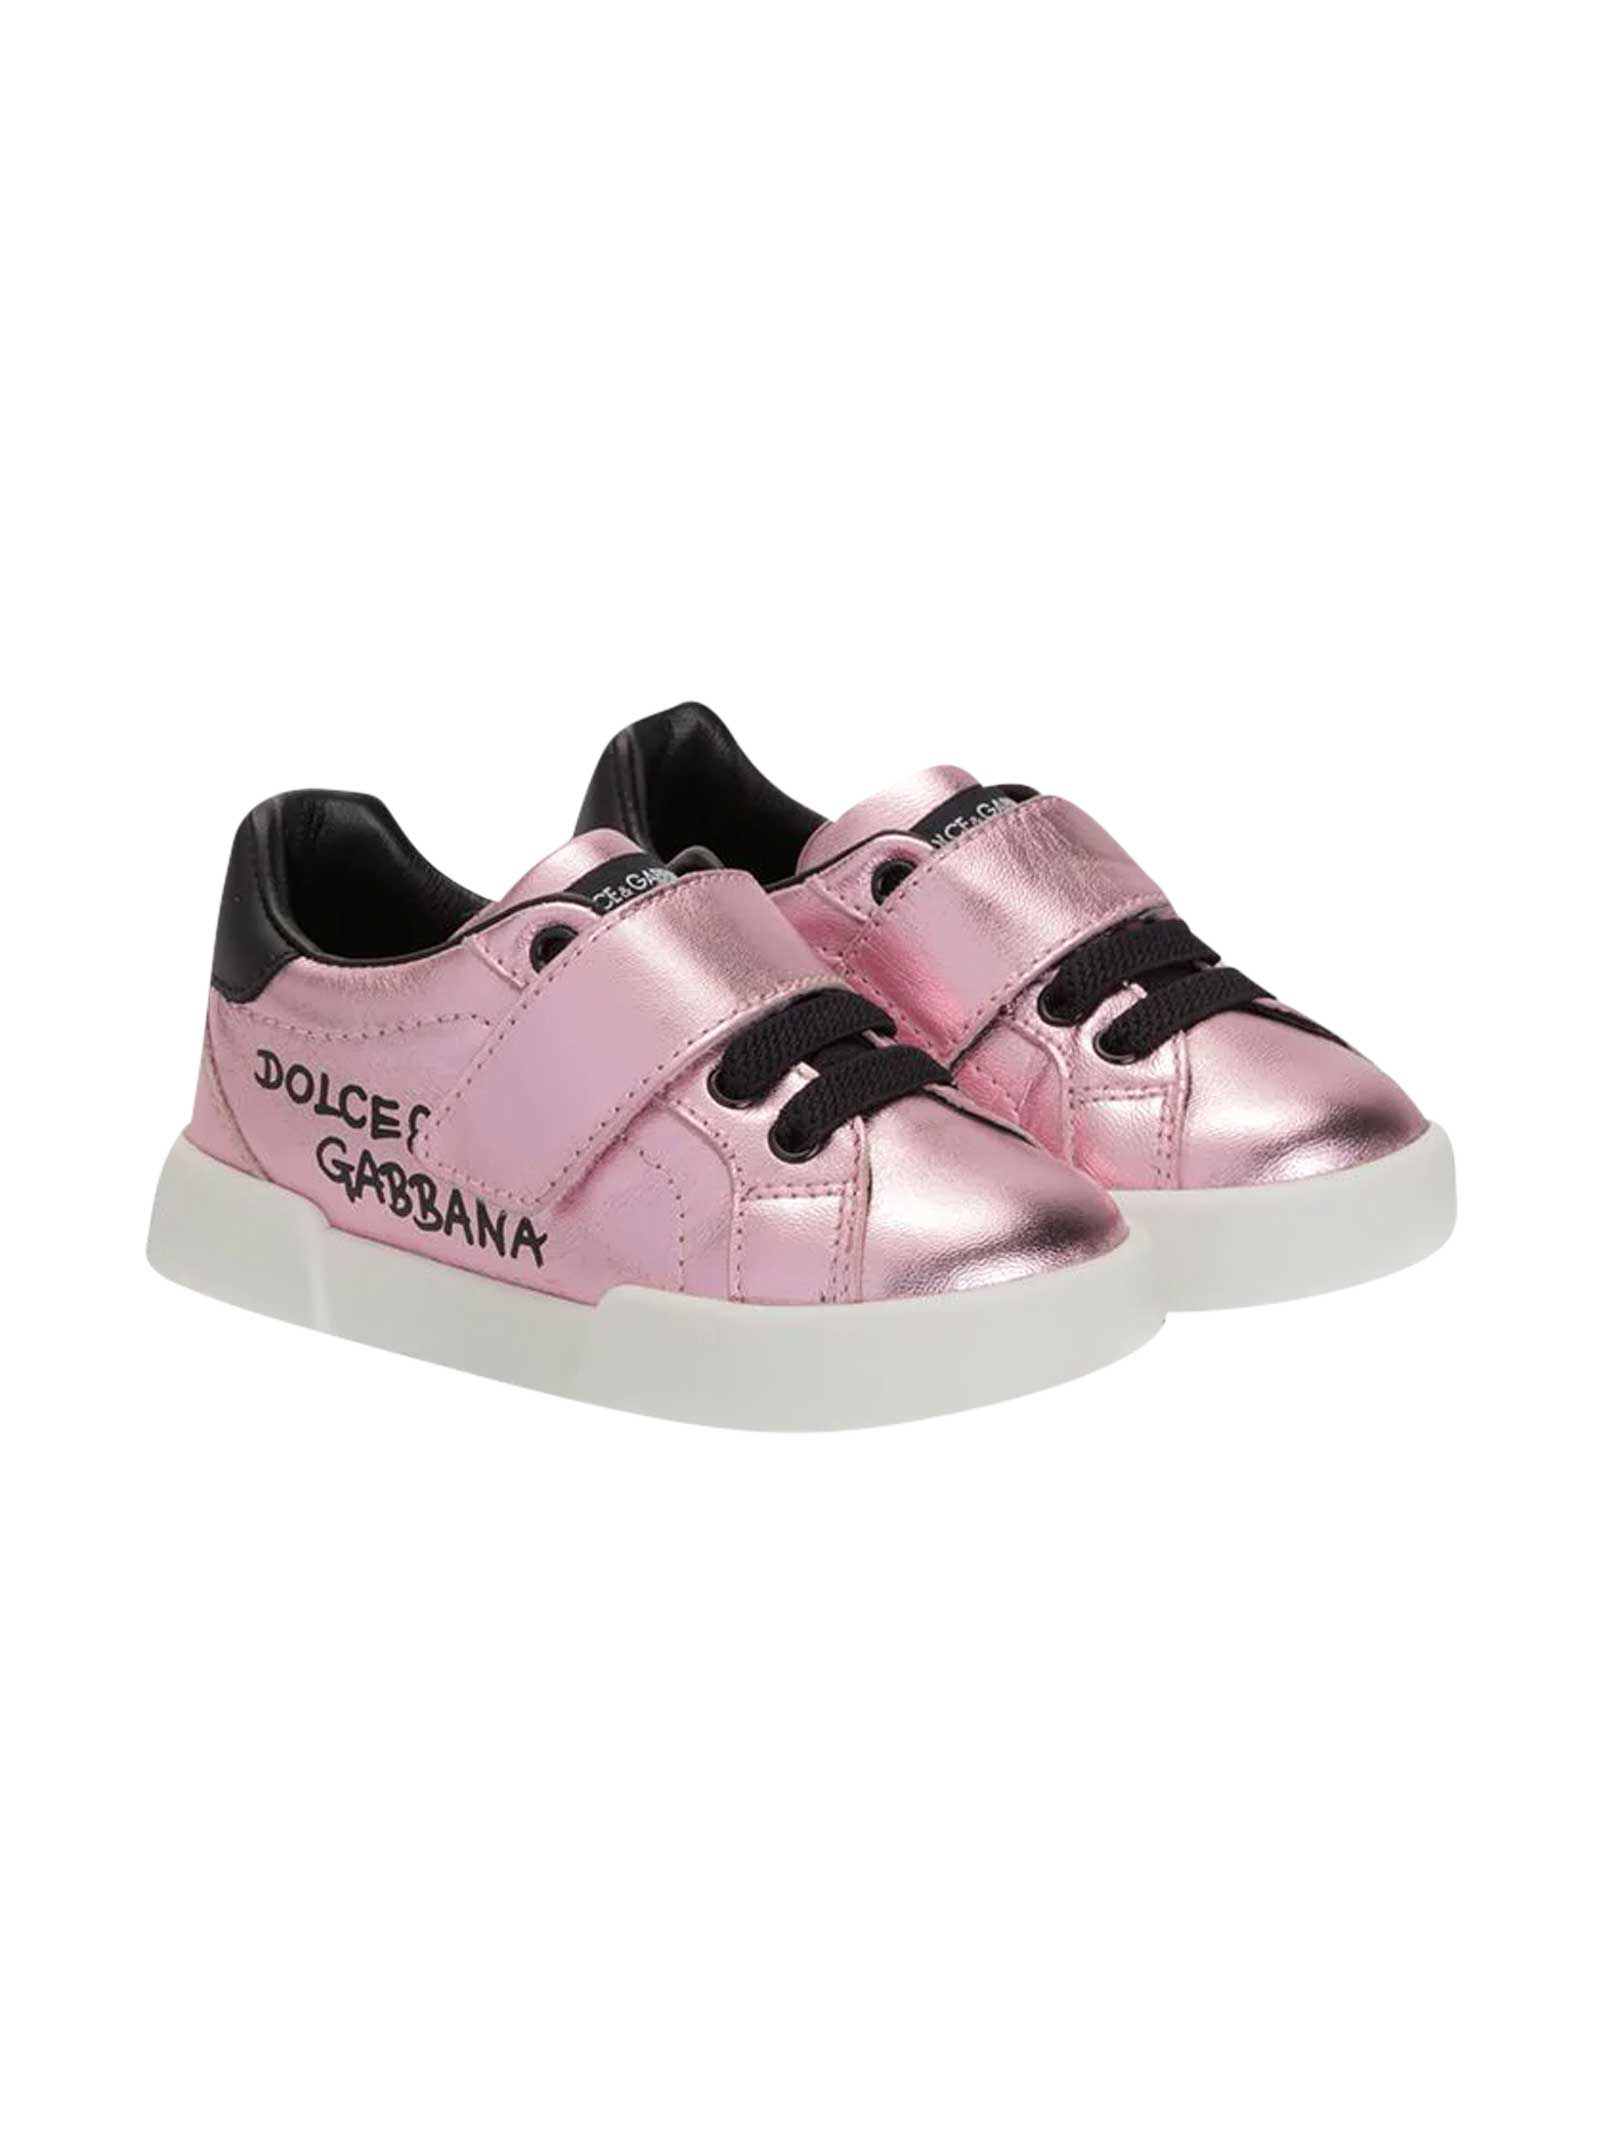 Buy Dolce & Gabbana Pink Sneakers online, shop Dolce & Gabbana shoes with free shipping